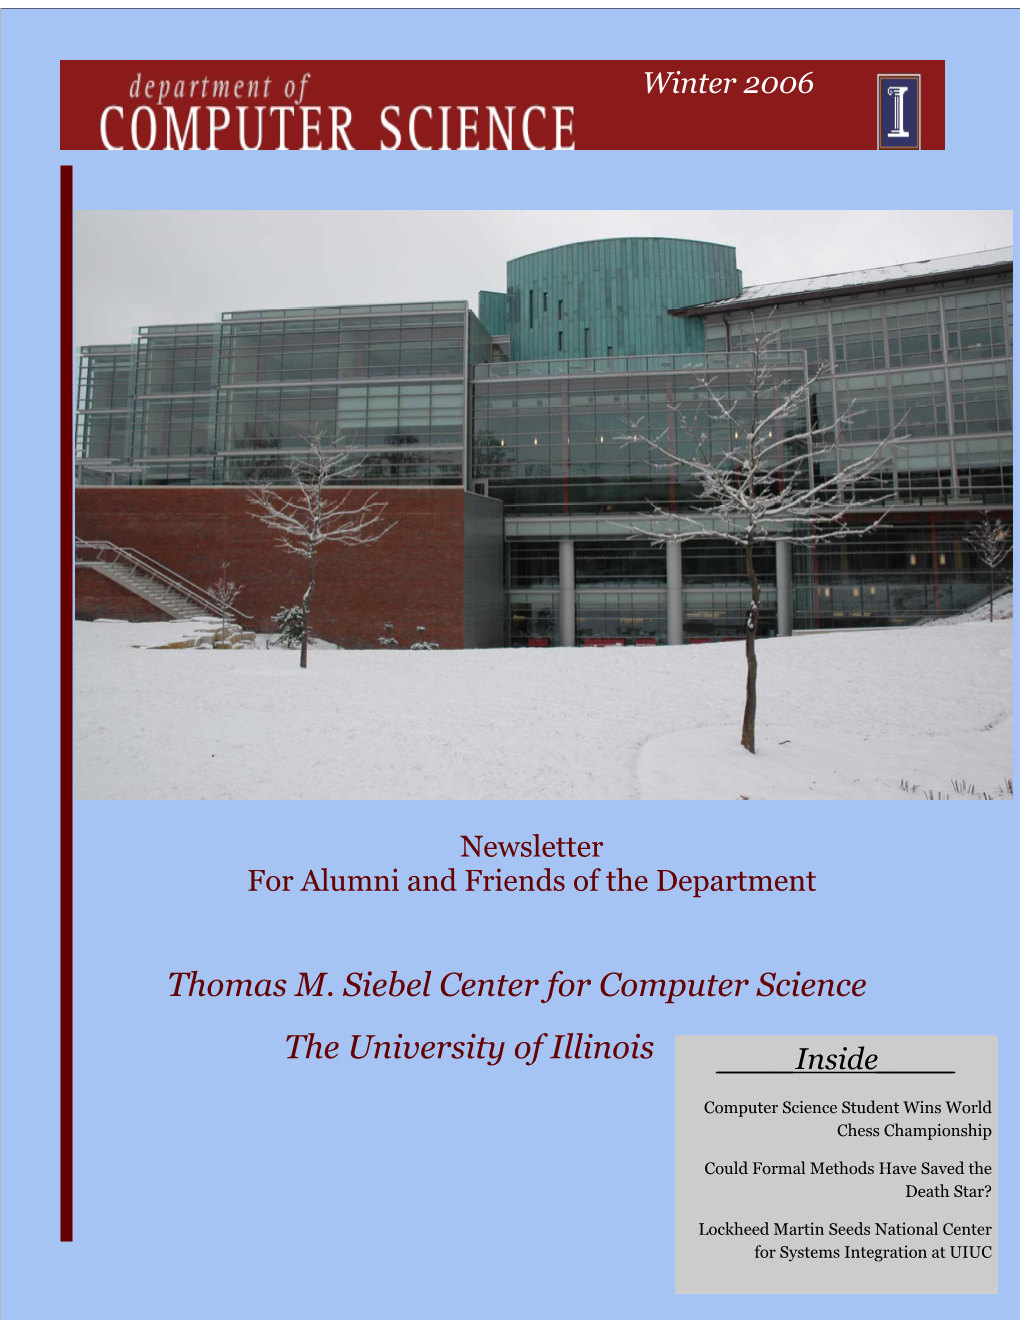 Thomas M. Siebel Center for Computer Science the University Of